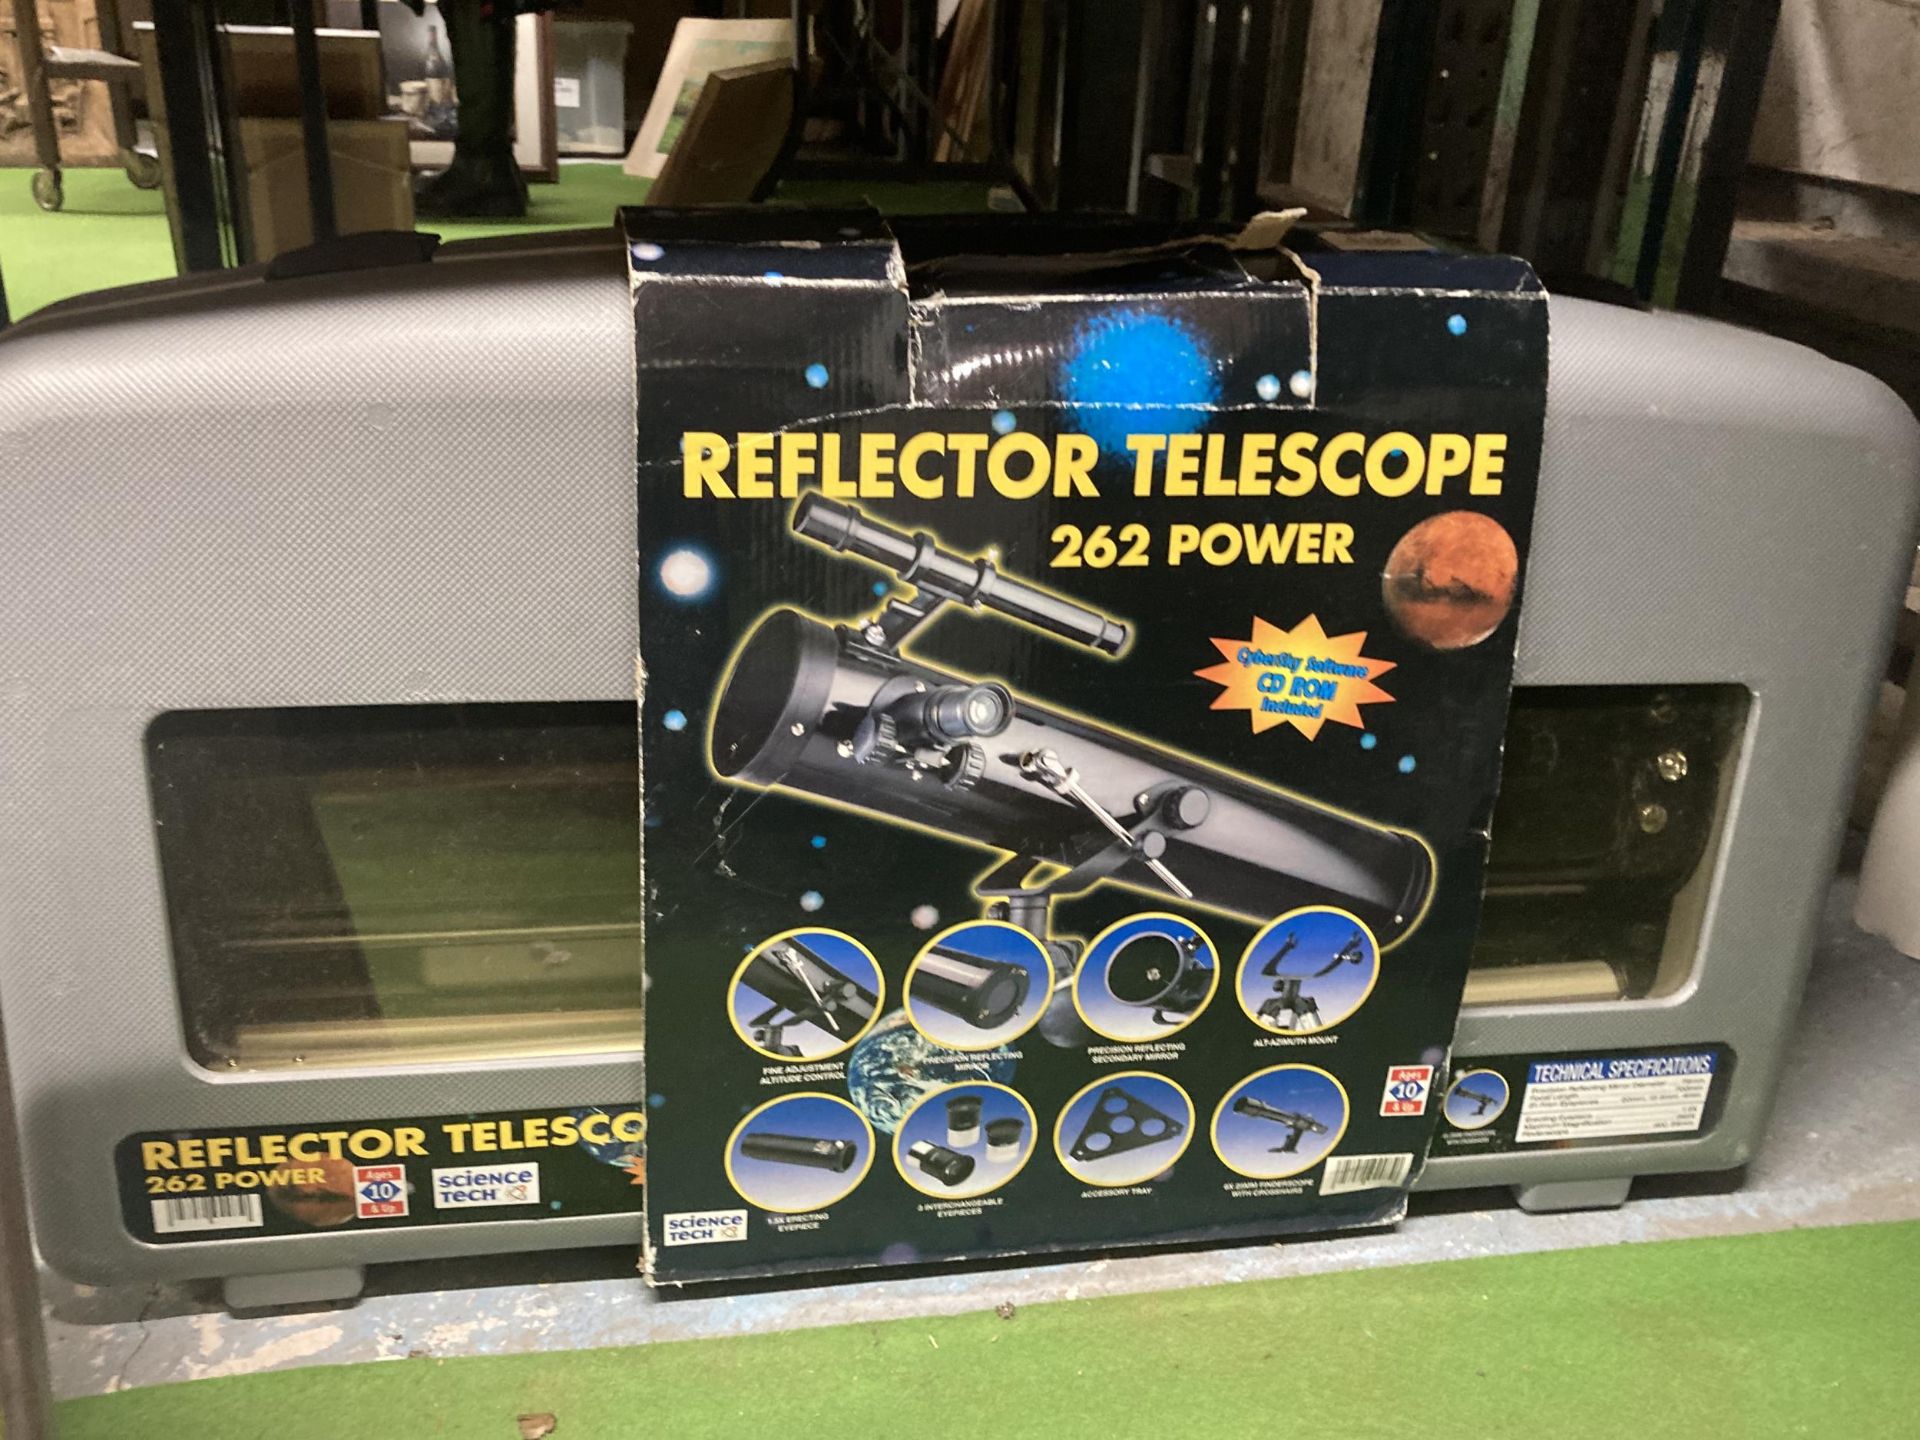 A LARGE REFLECTOR TELESCOPE - BOXED